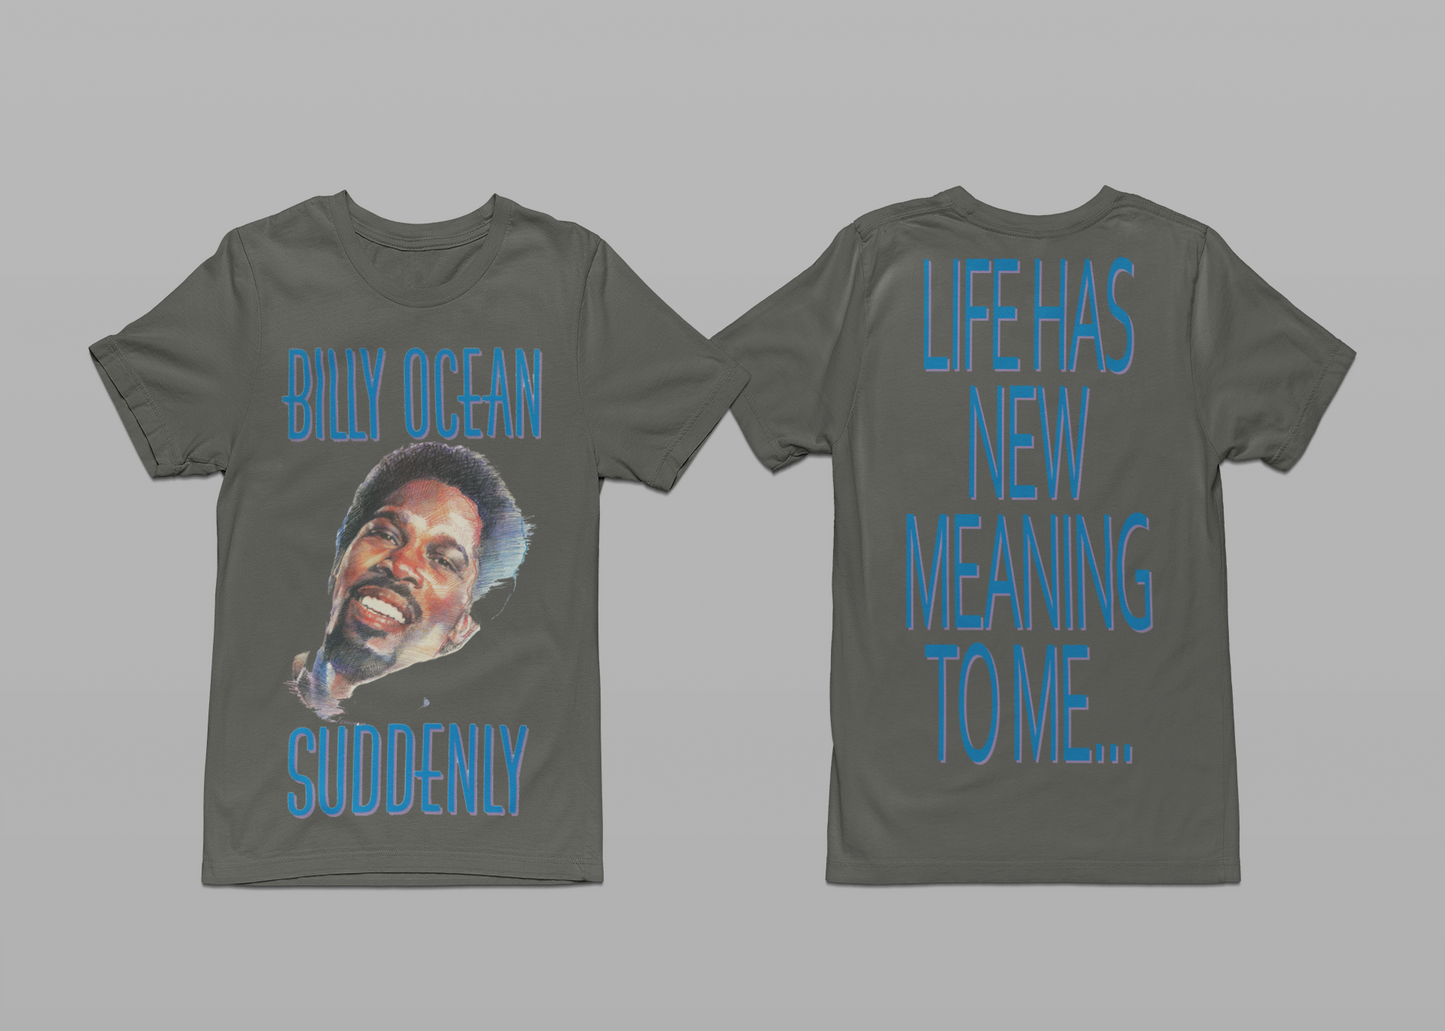 'SUDDENLY' - EXPLODED TEESHIRT FRONT AND BACK PRINT